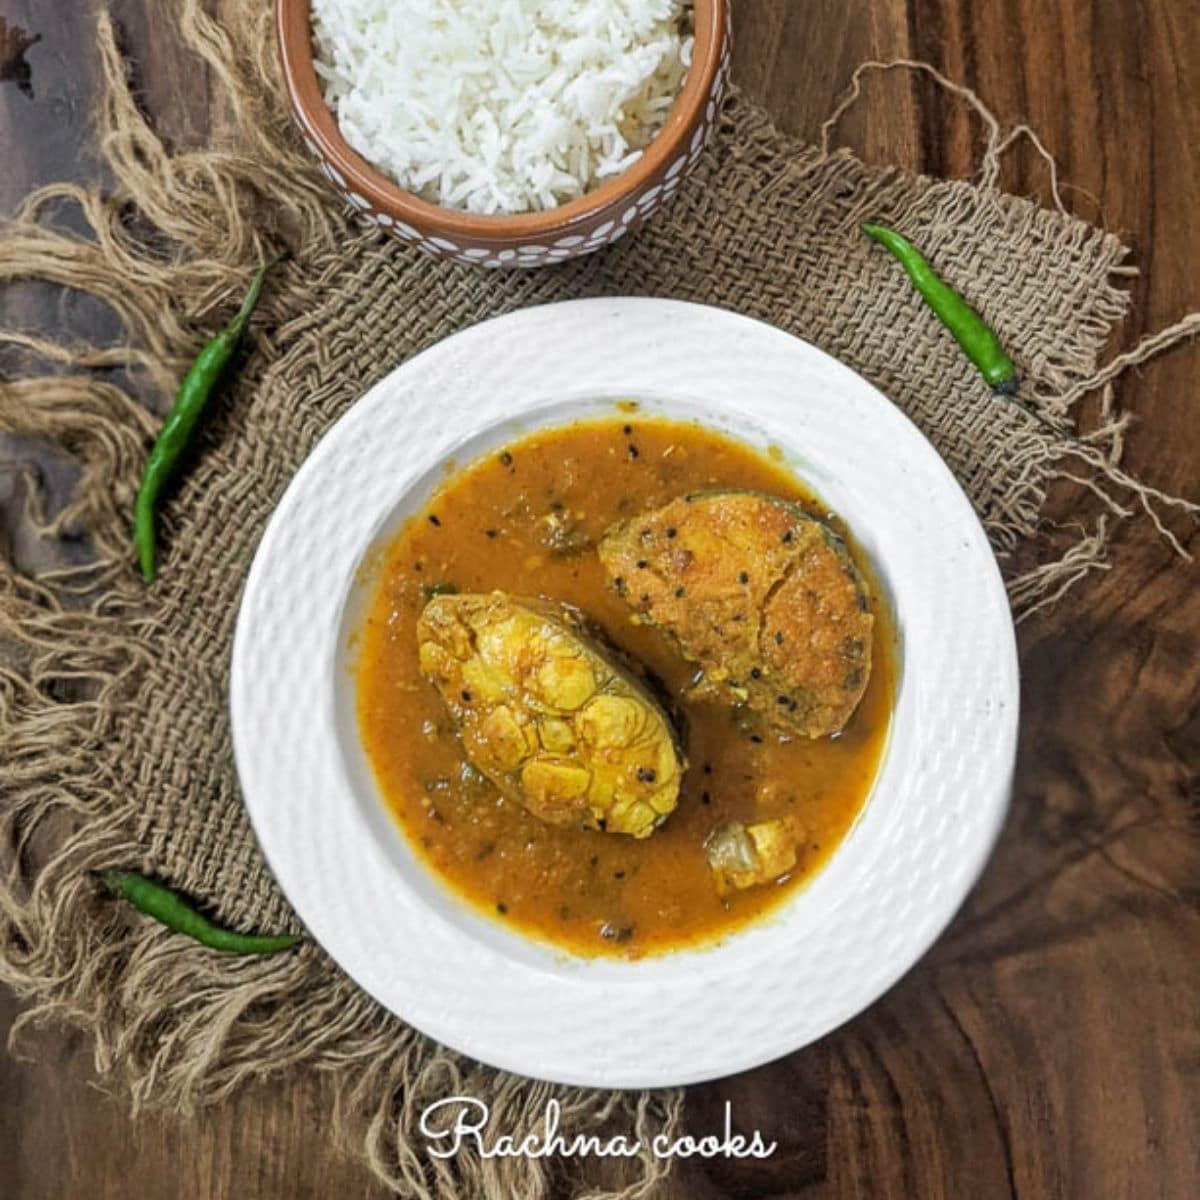 Bengali Cod Fish Kebabs stock image. Image of cooked - 83145487